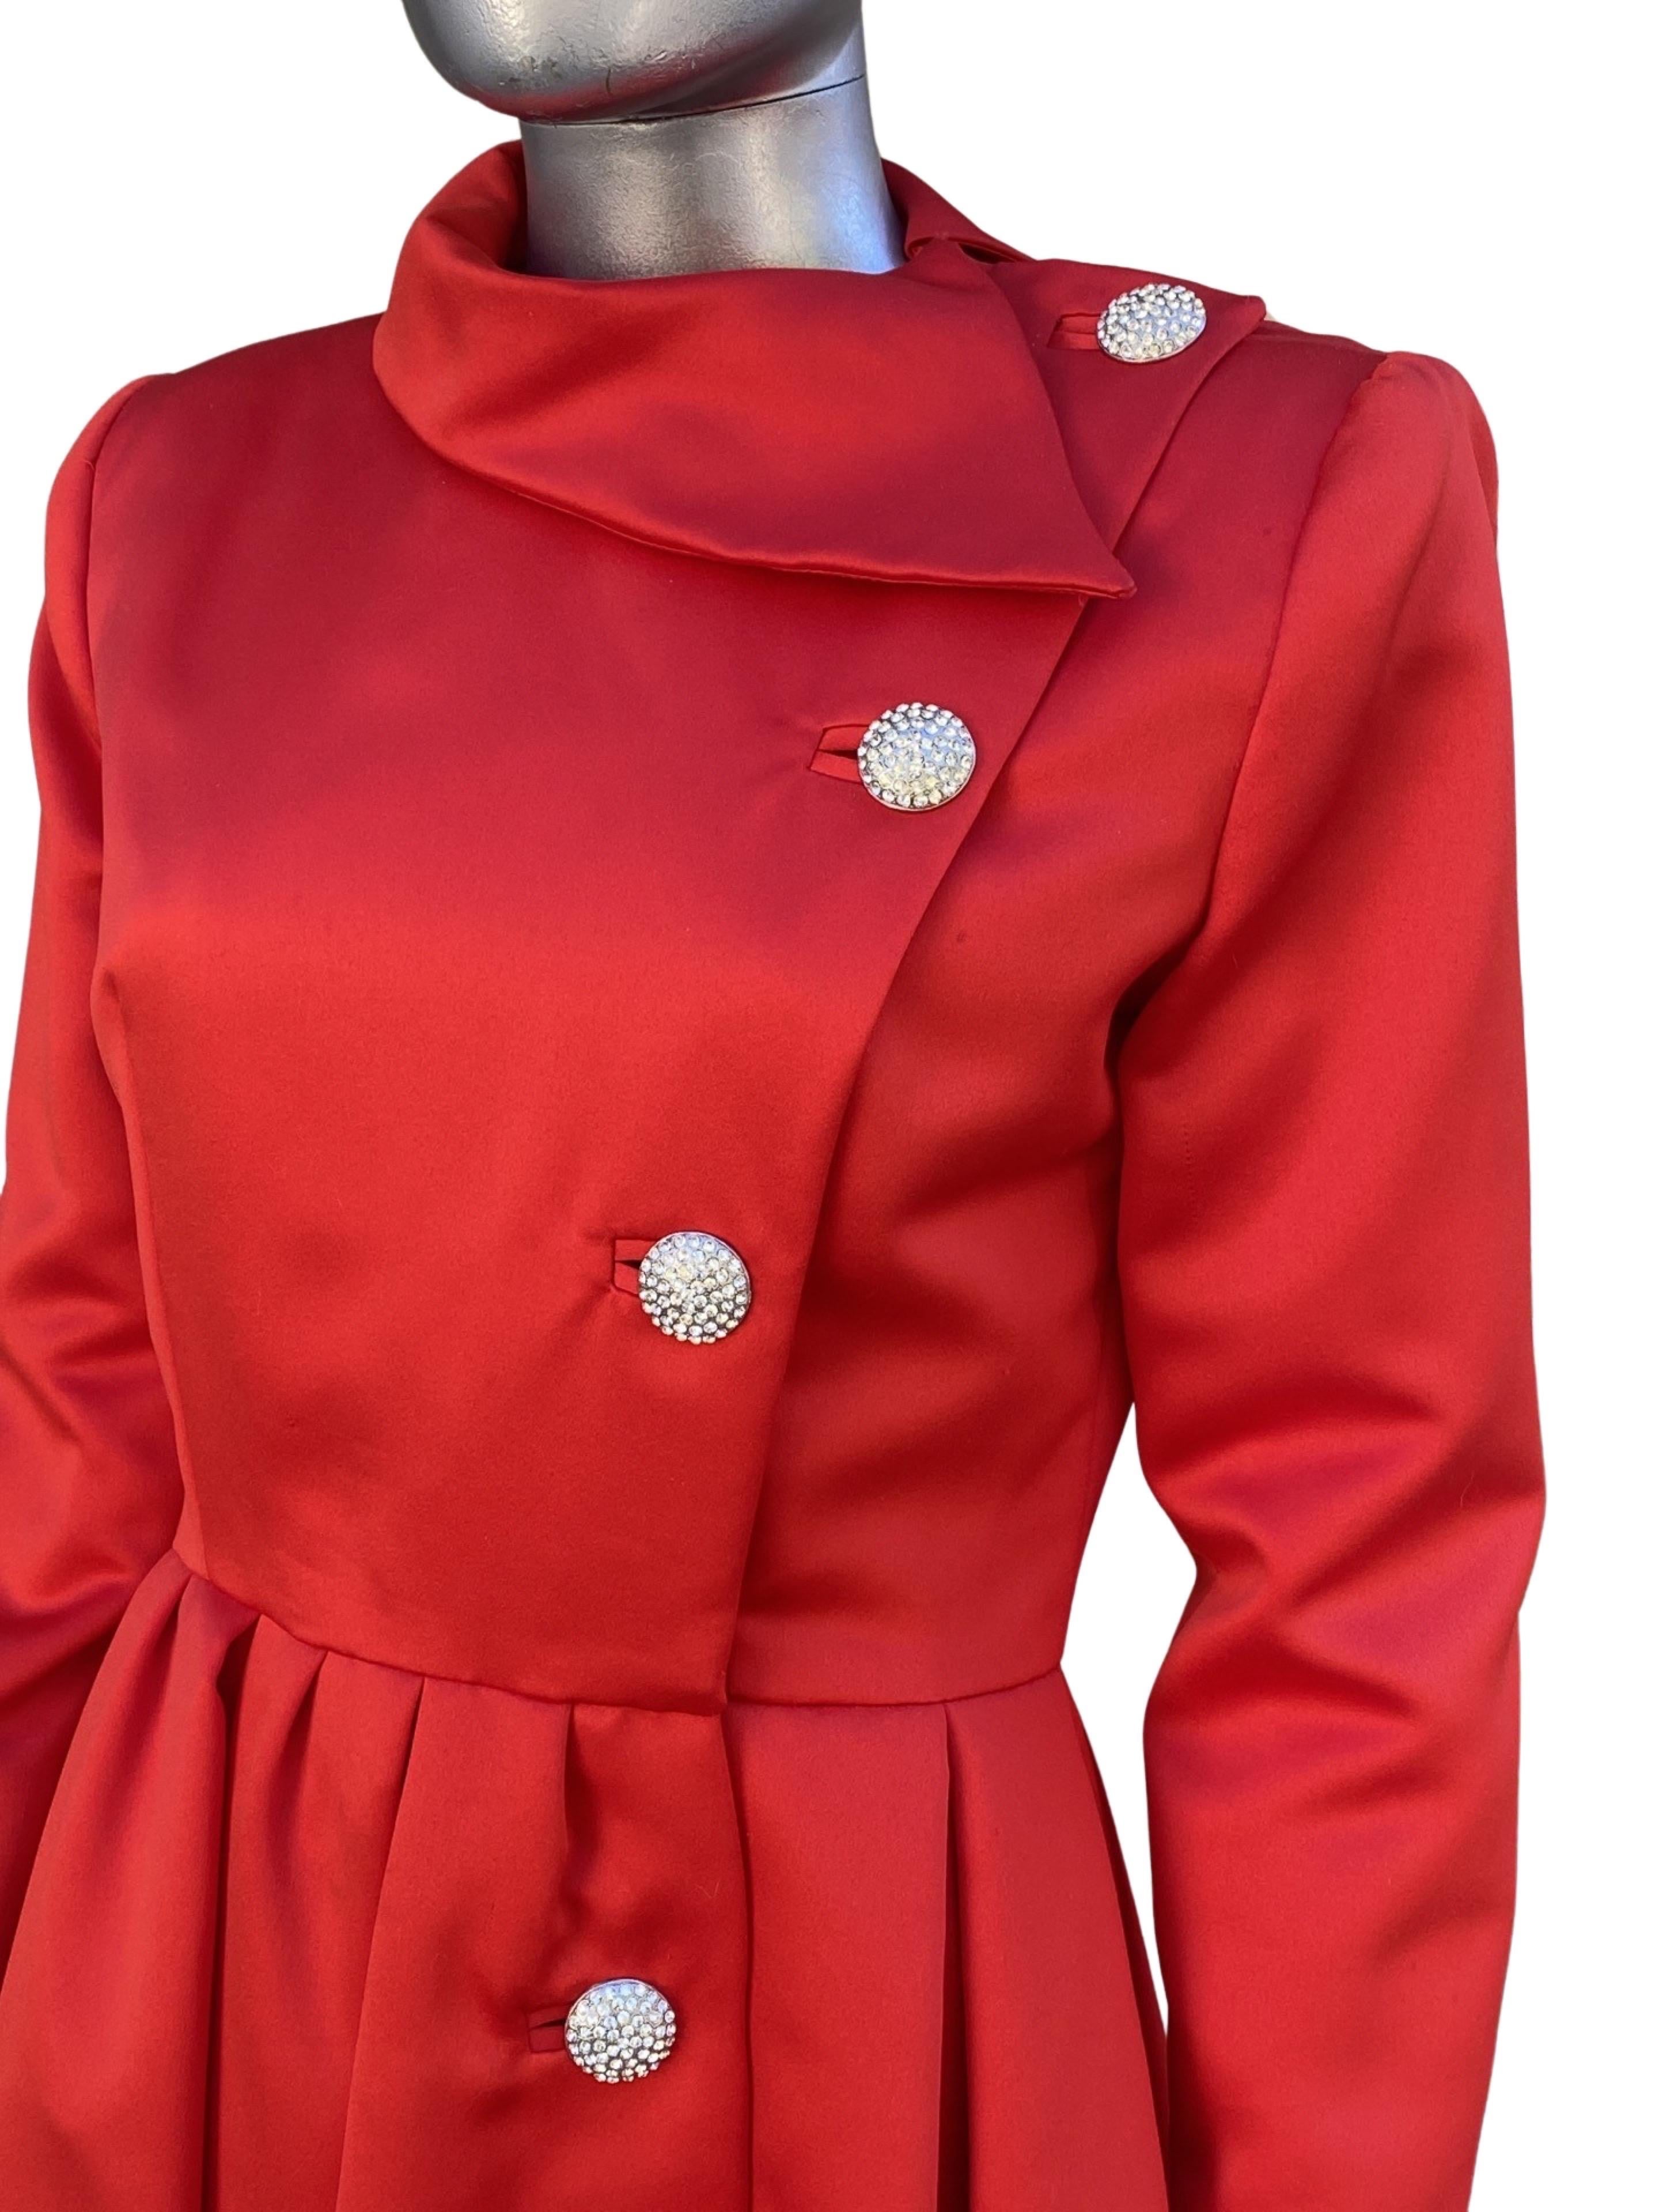 Red Satin and Rhinestone Button Coat Dress by Victor Costa Neiman Marcus Size 8 For Sale 4